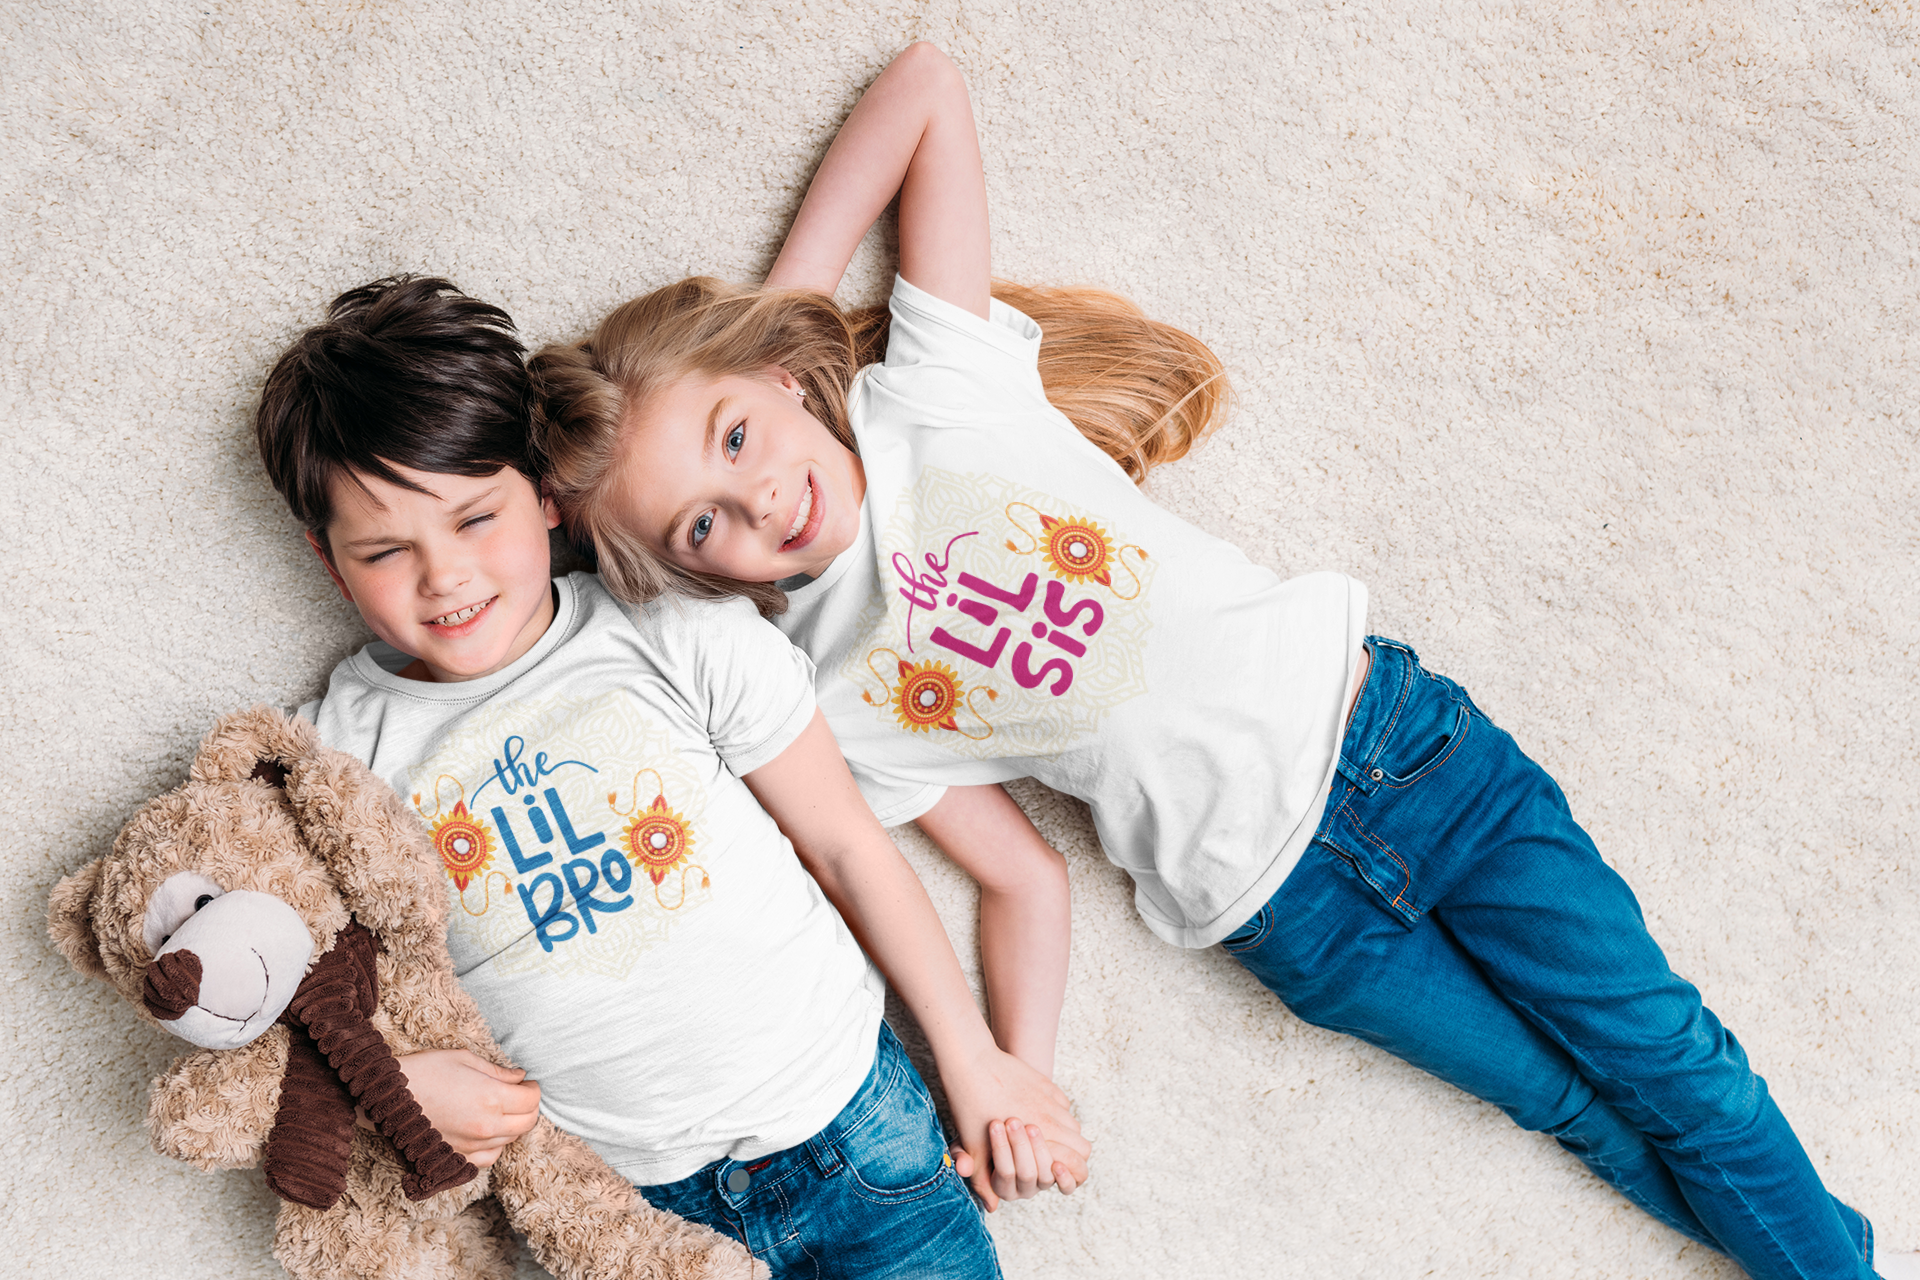 The BROTHER - SISTER Printed Tshirt for Kids